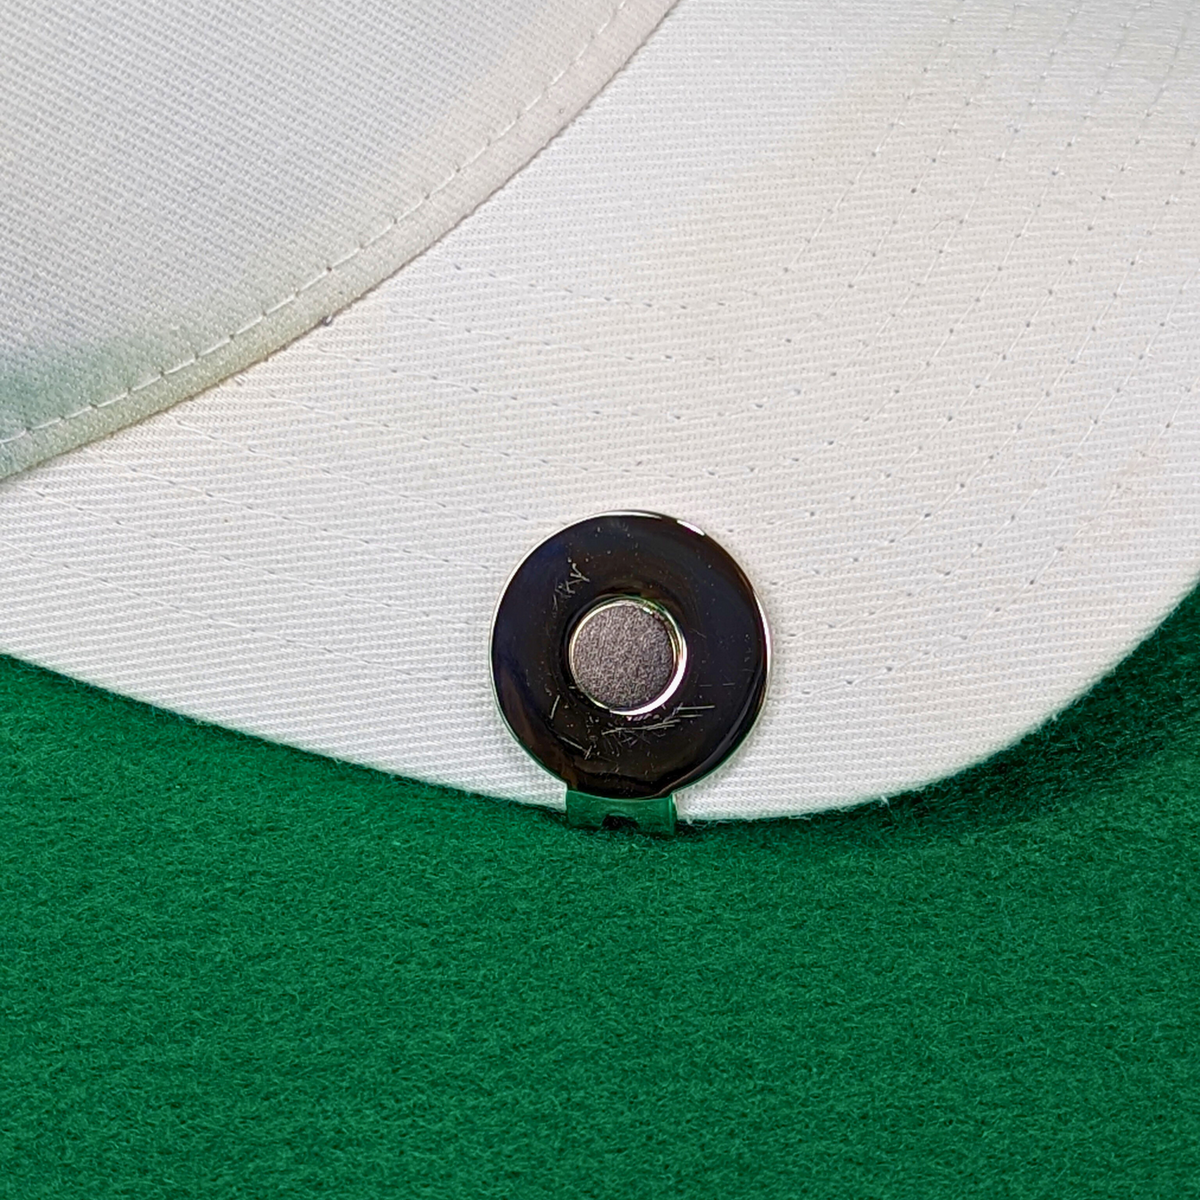 Tequila - Golf Ball Marker with Magnetic Golf Hat Clip